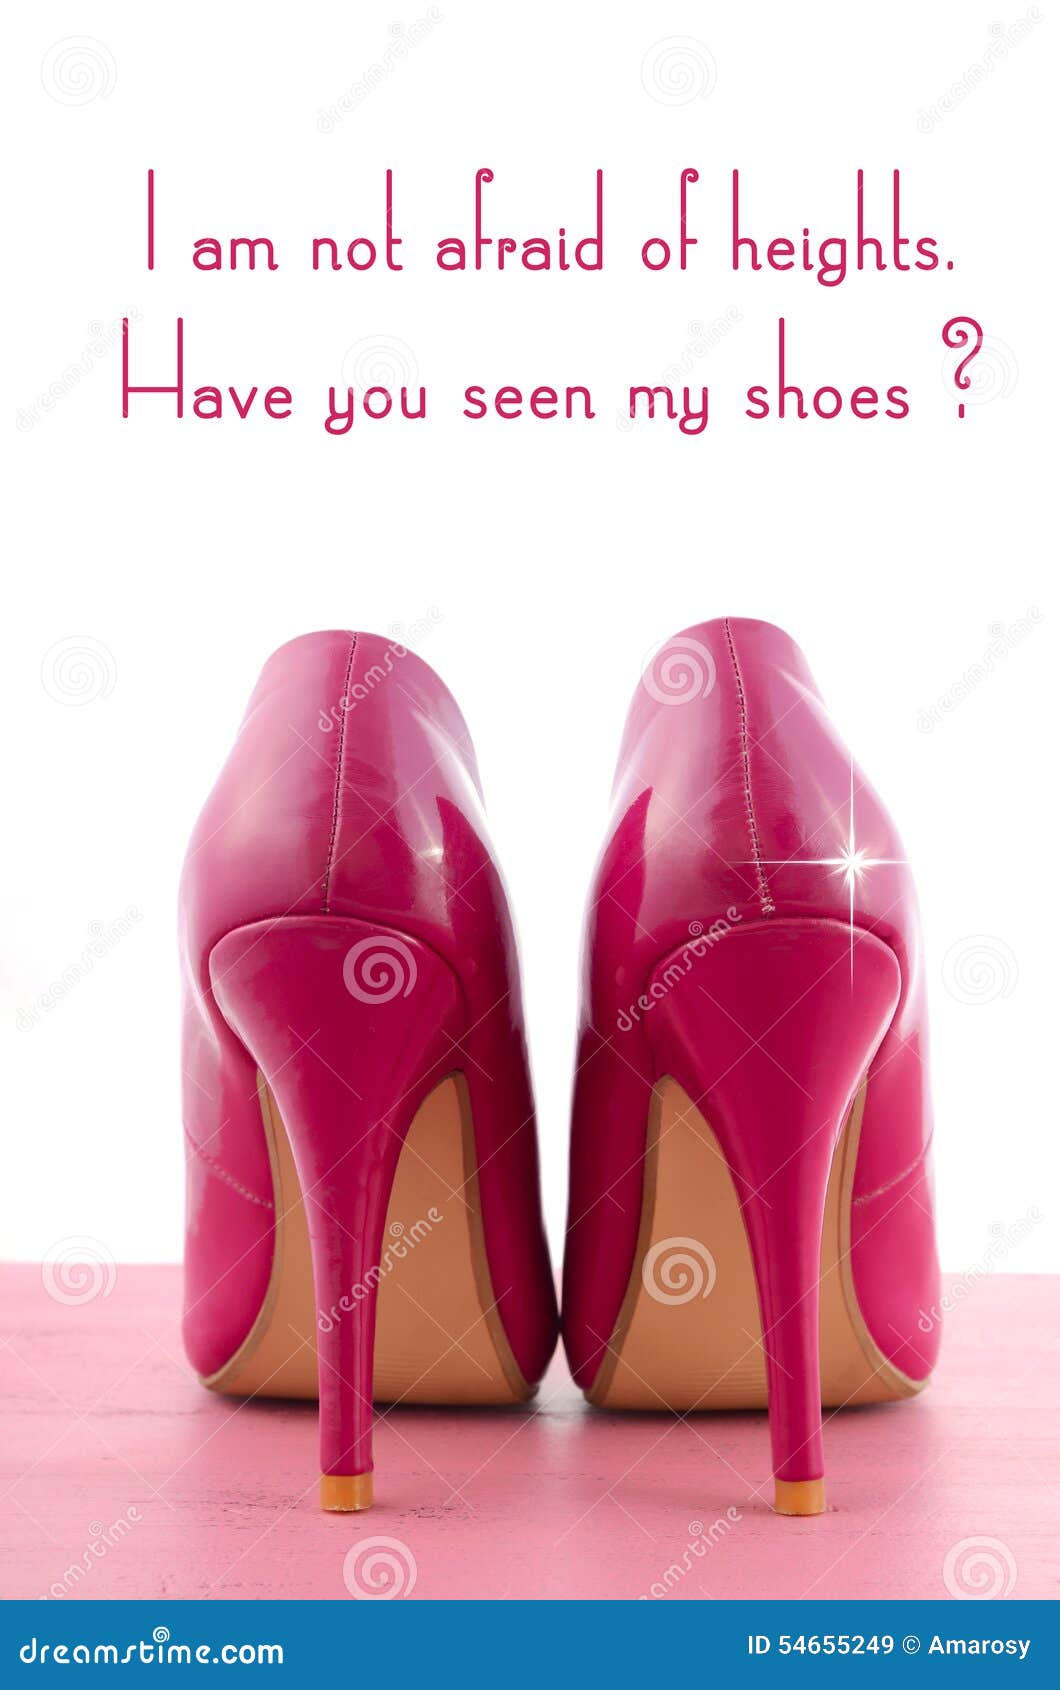 High Heel Shoe With Cute Inspiration And Funny Quotation Stock Photo -  Download Image Now - iStock